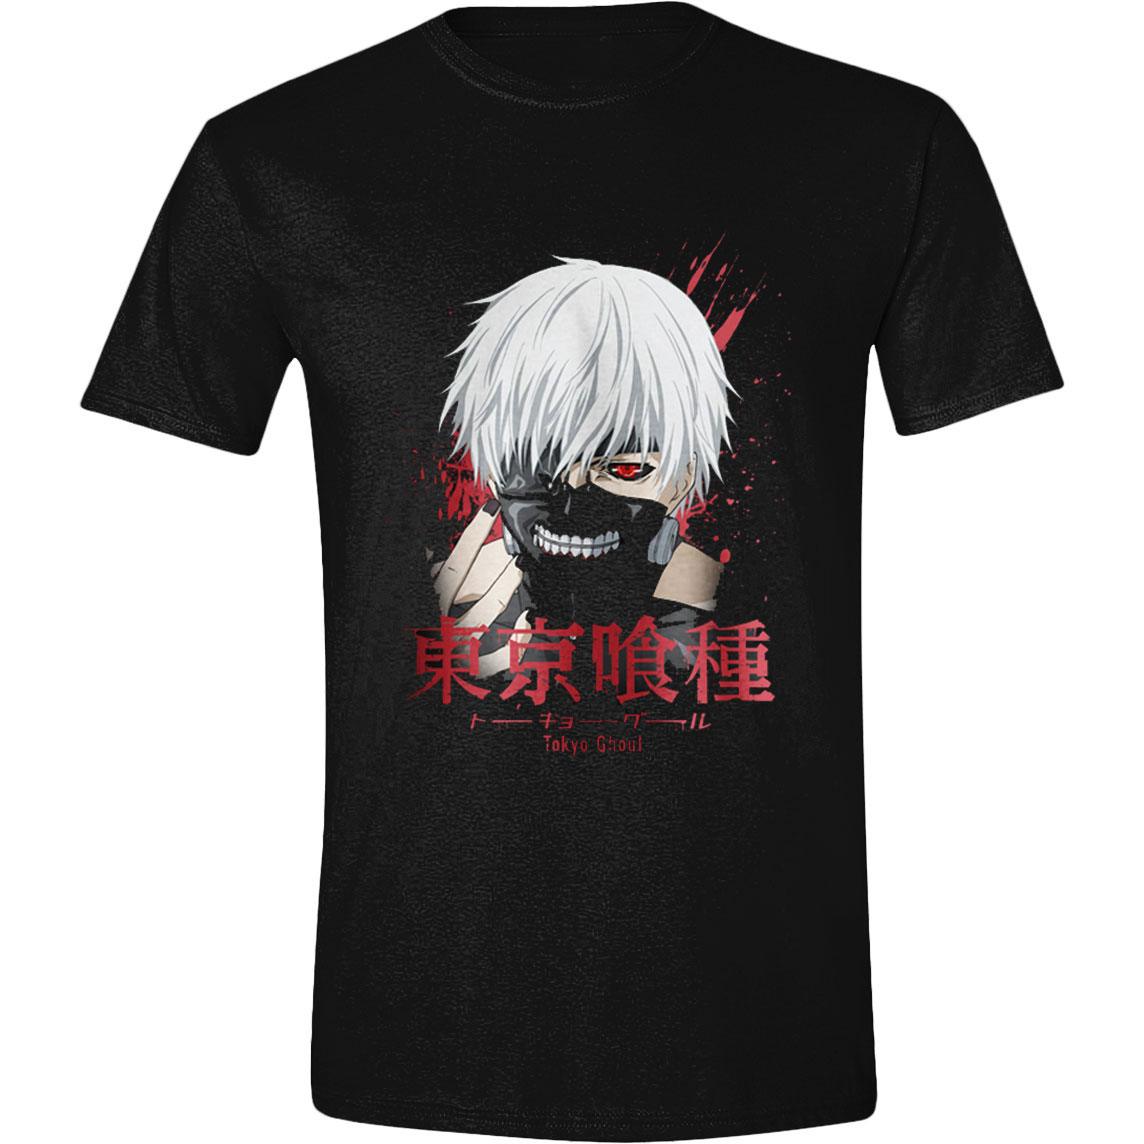 Tokyo Ghoul T-Shirt Within His Grasp (XL)